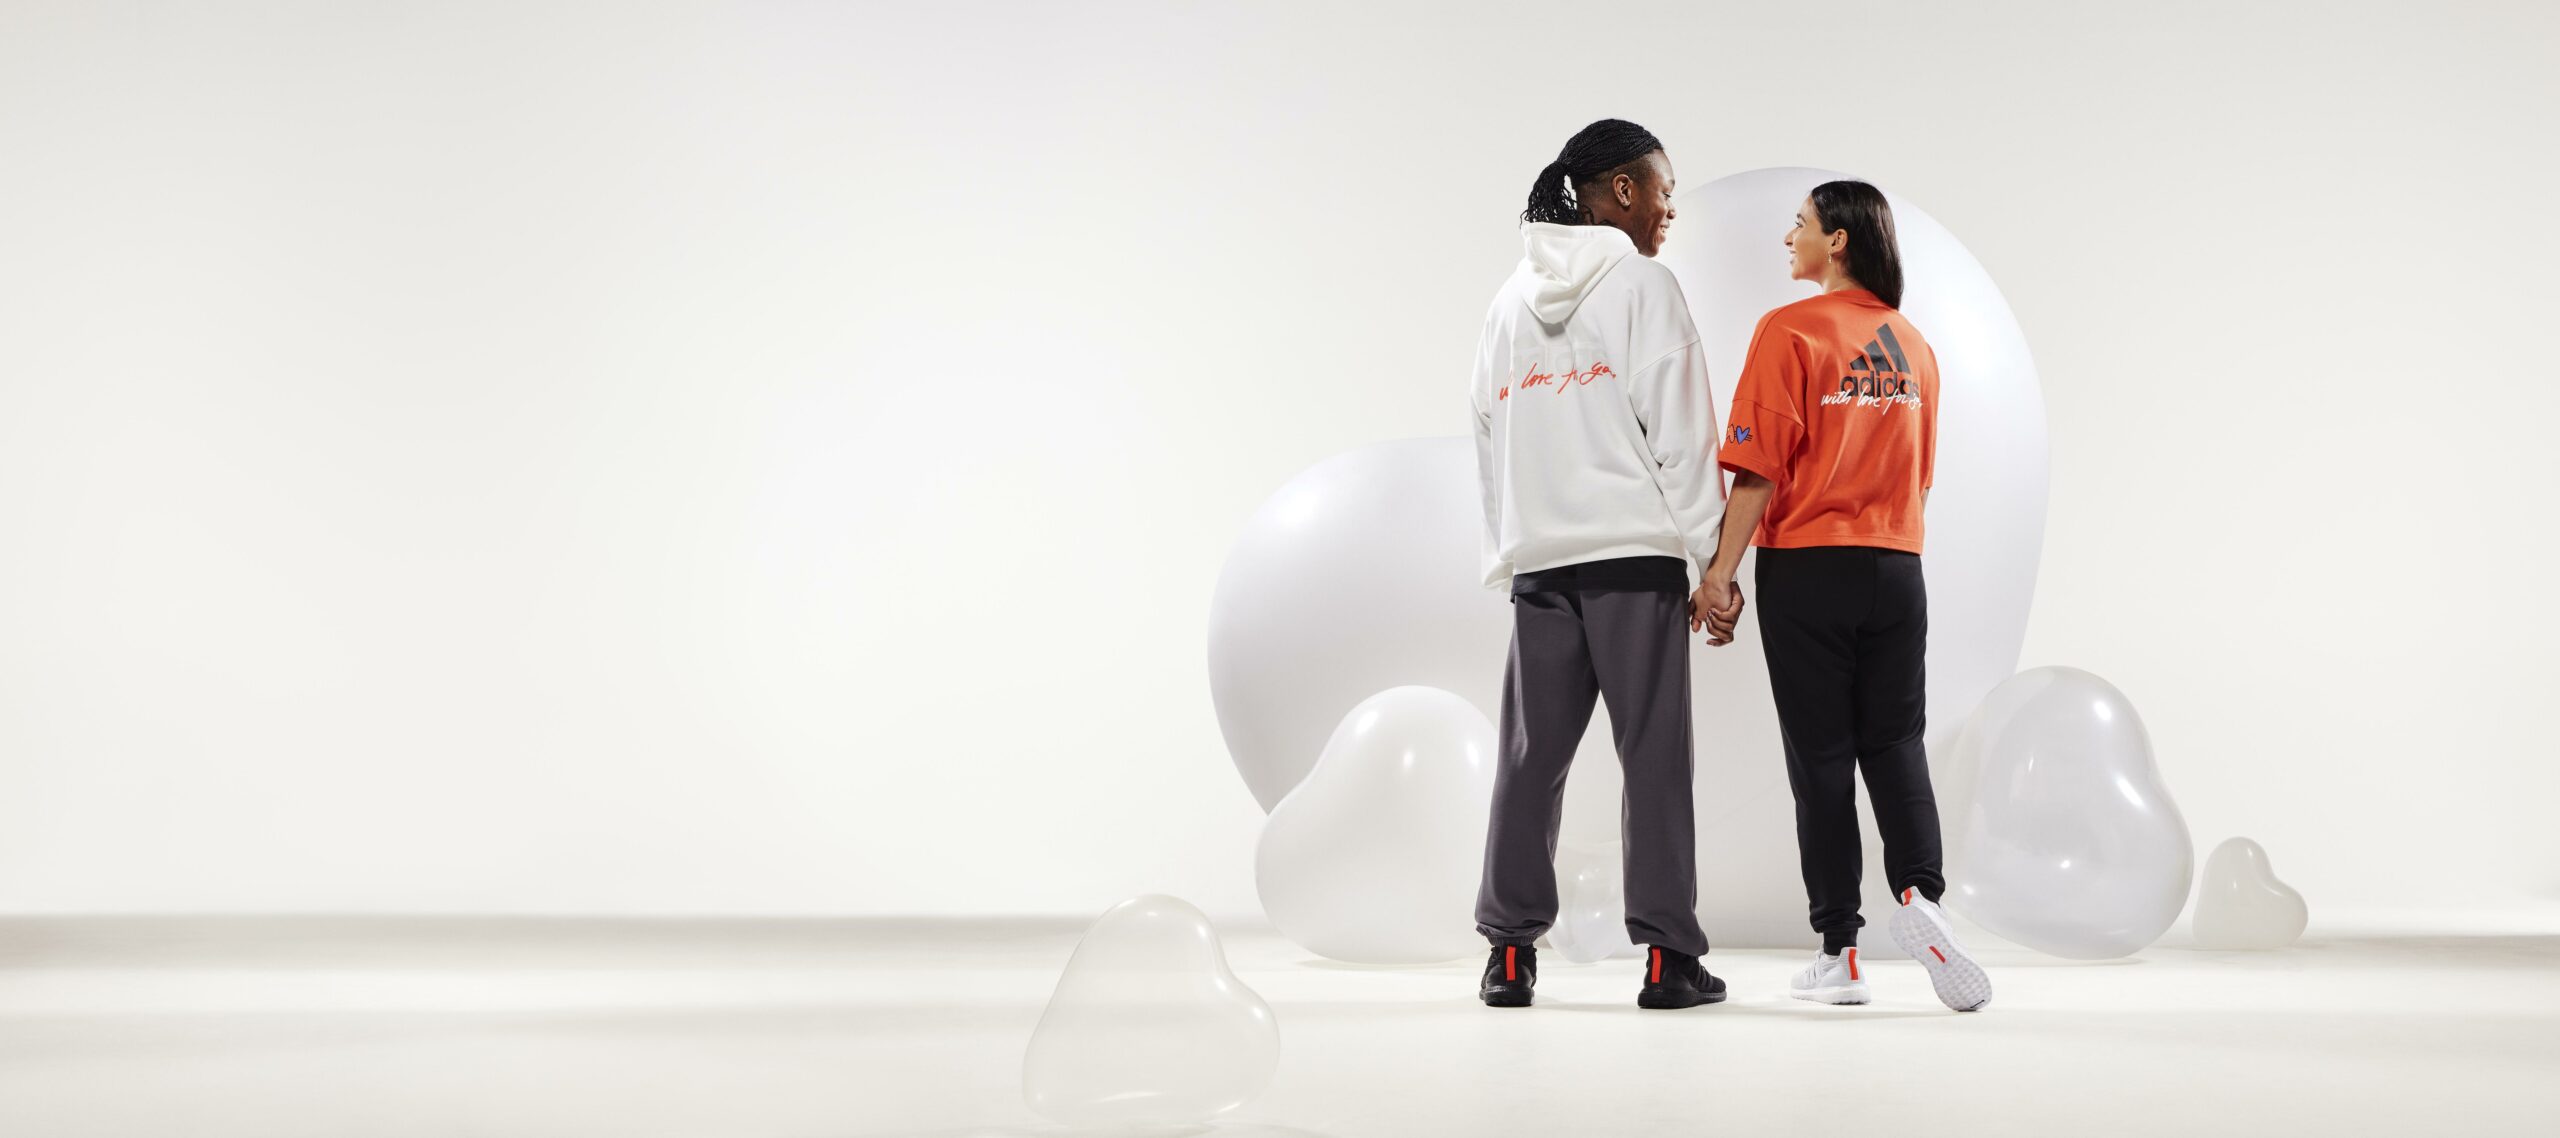 Share the love with this exclusive adidas valentine’s day collection